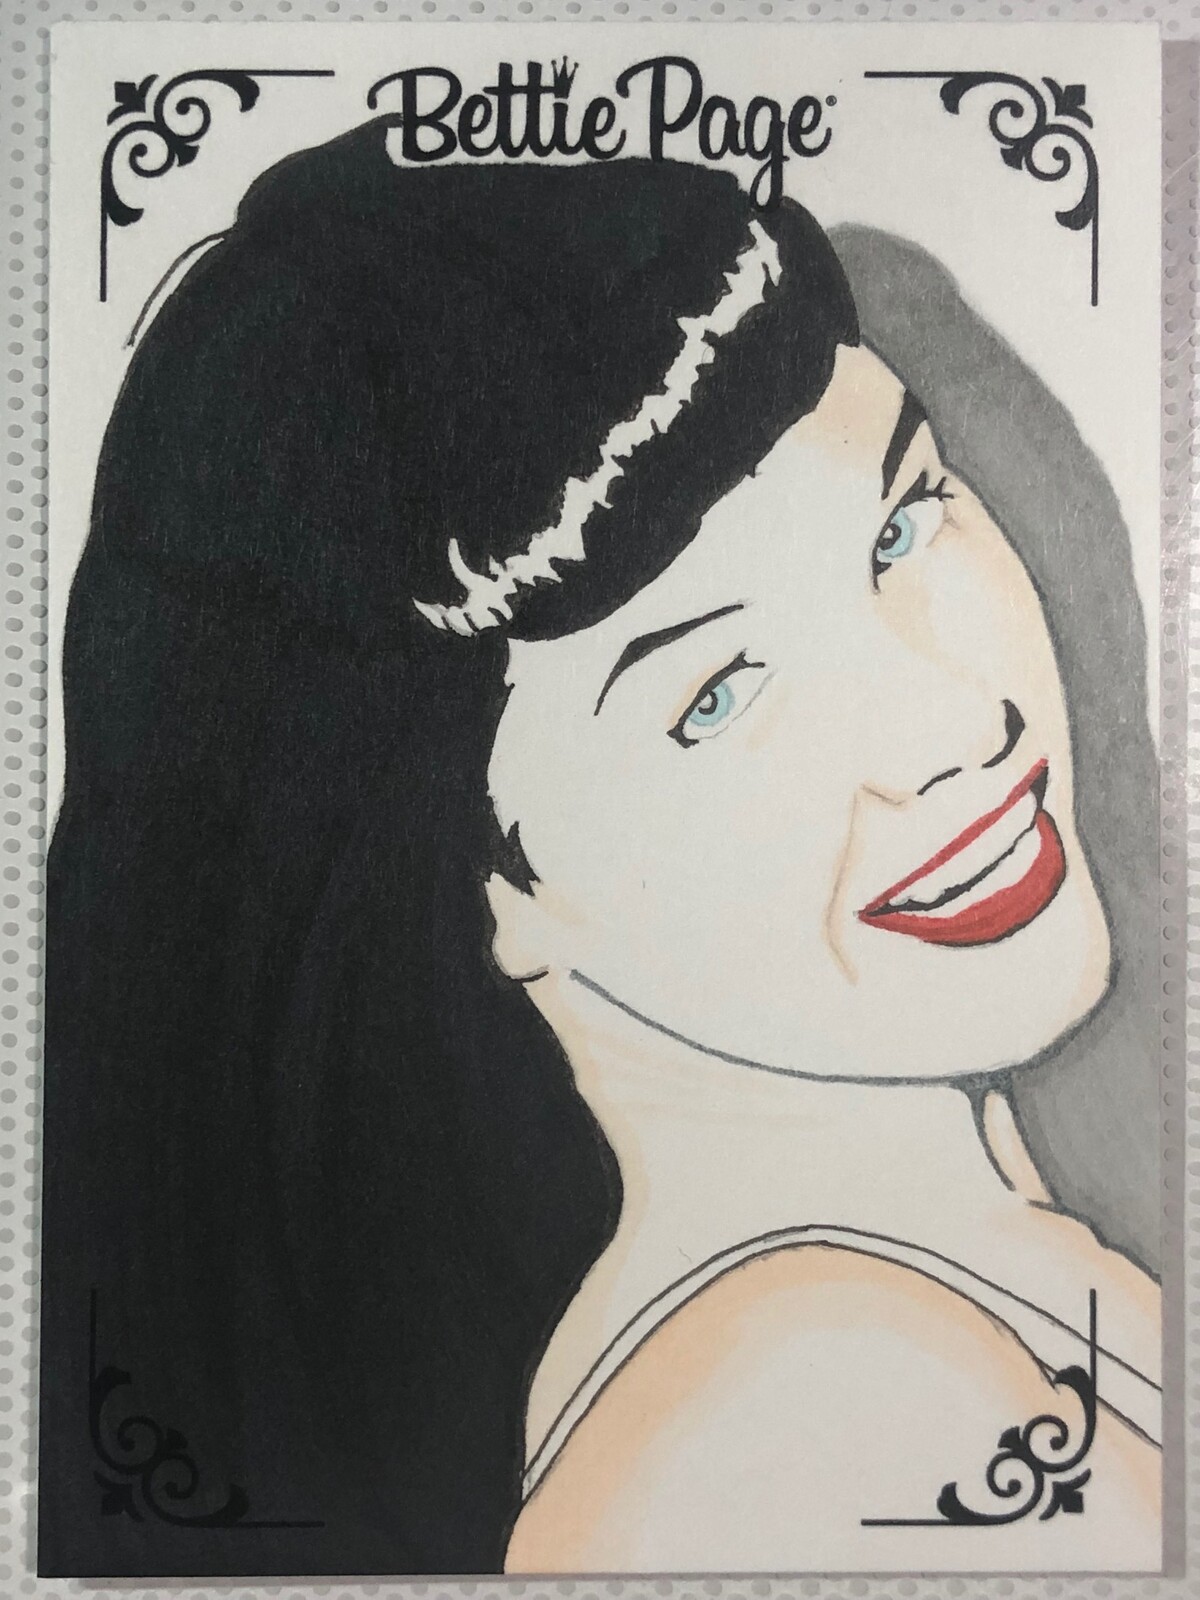 Bettie Page Art cards created for Dynamite Entertainments officially licensed Bettie Page trading card set